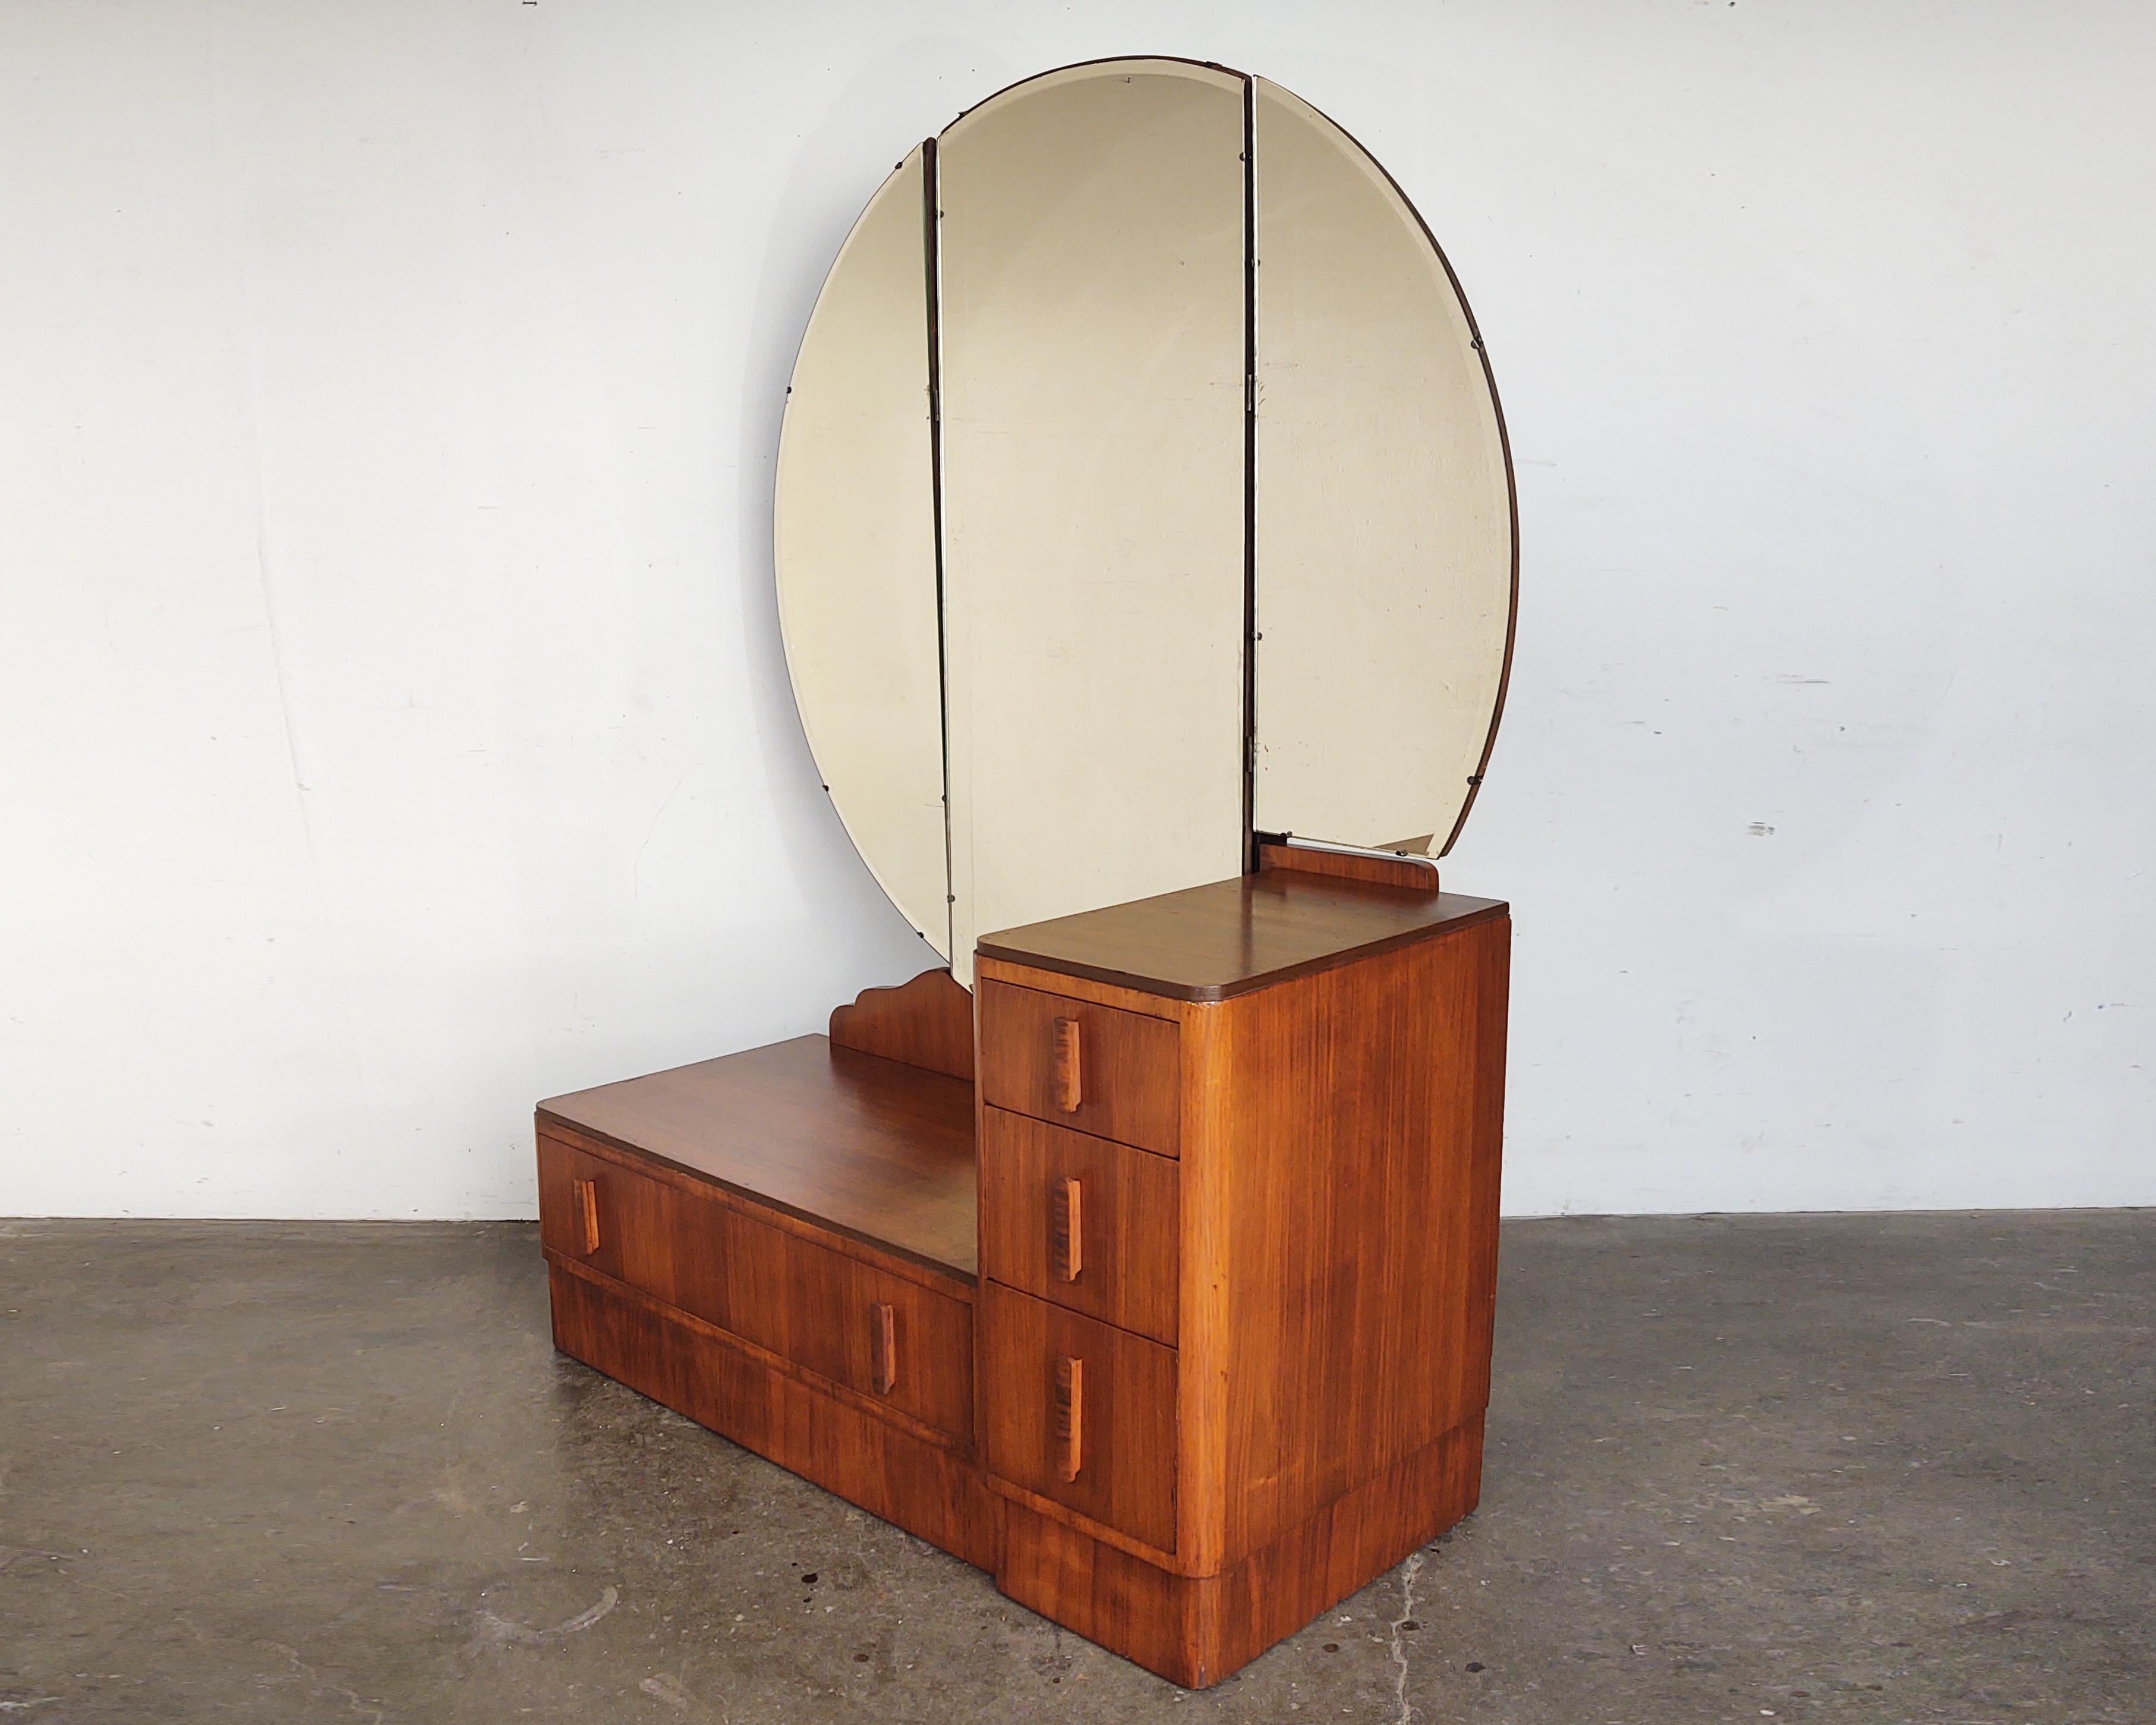 Gorgeous Art Deco vanity with walnut base circa 1930s. Four drawers with complementary wood pulls and dovetail joinery. Three-piece round mirror attached to the back with both ends able to pivot forward. Beautiful walnut wood grain covering entire